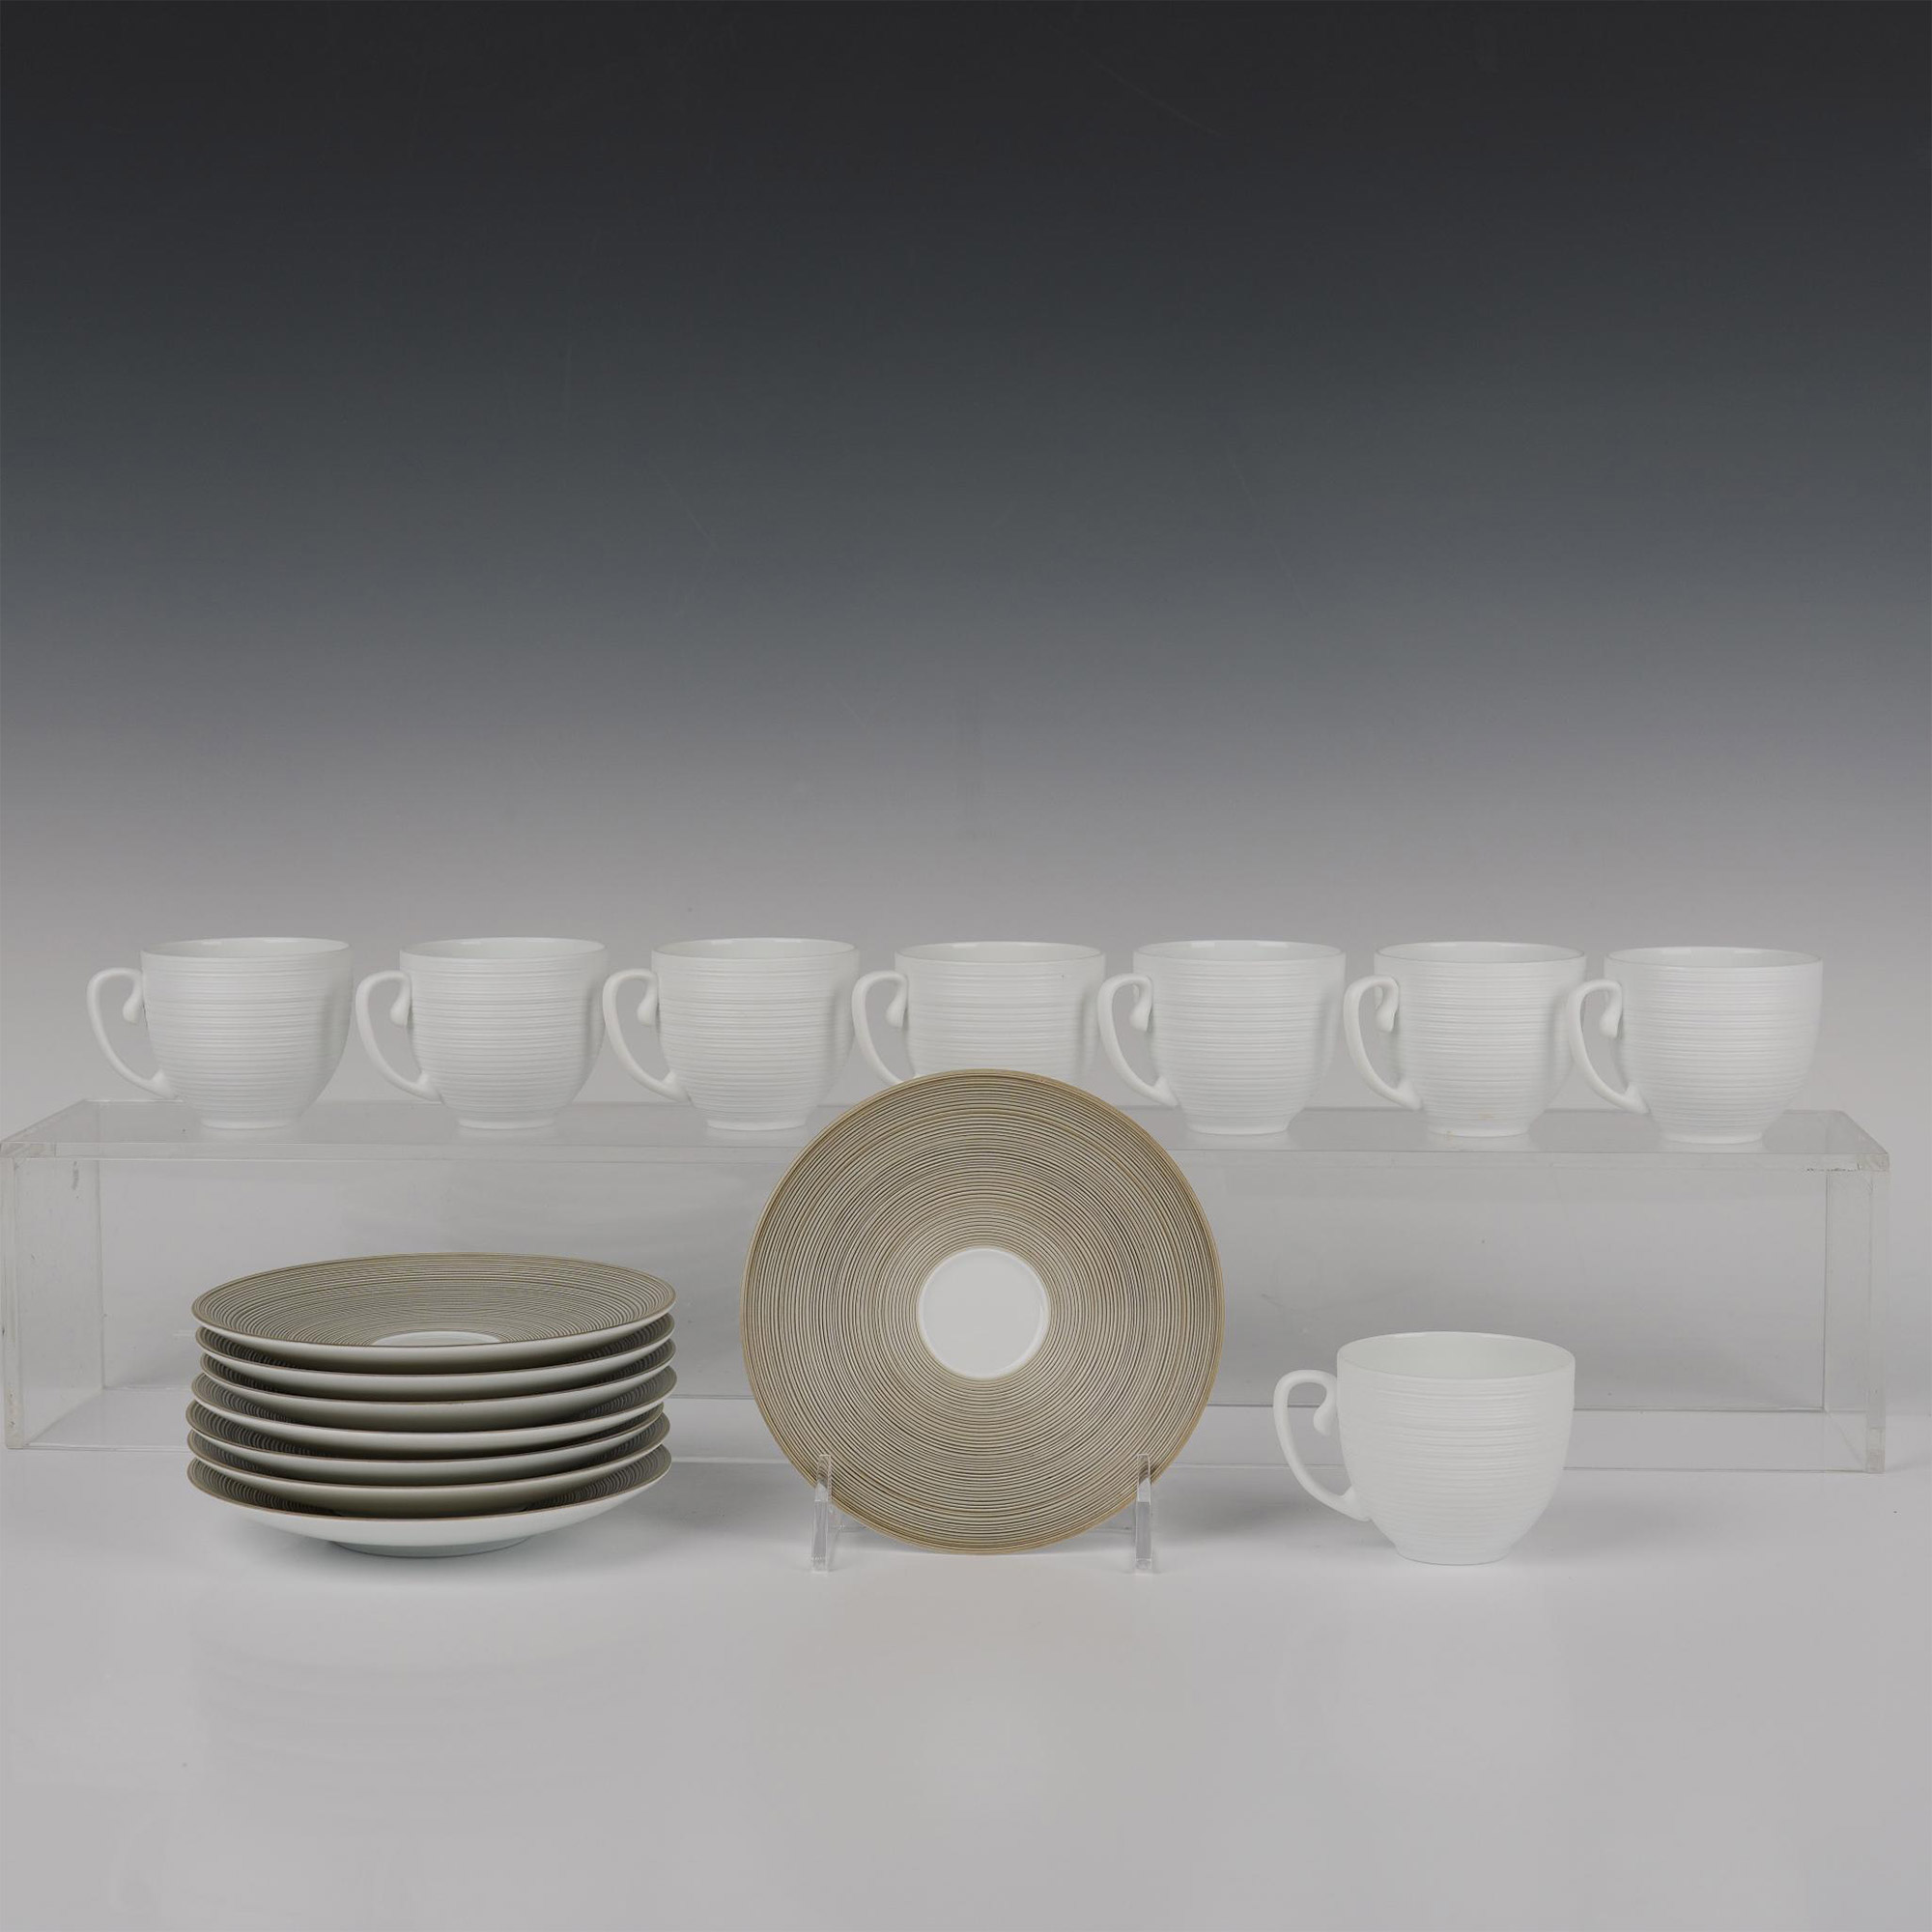 16pc JL Coquet Cups & Saucers for 8, Hemisphere - Image 2 of 6